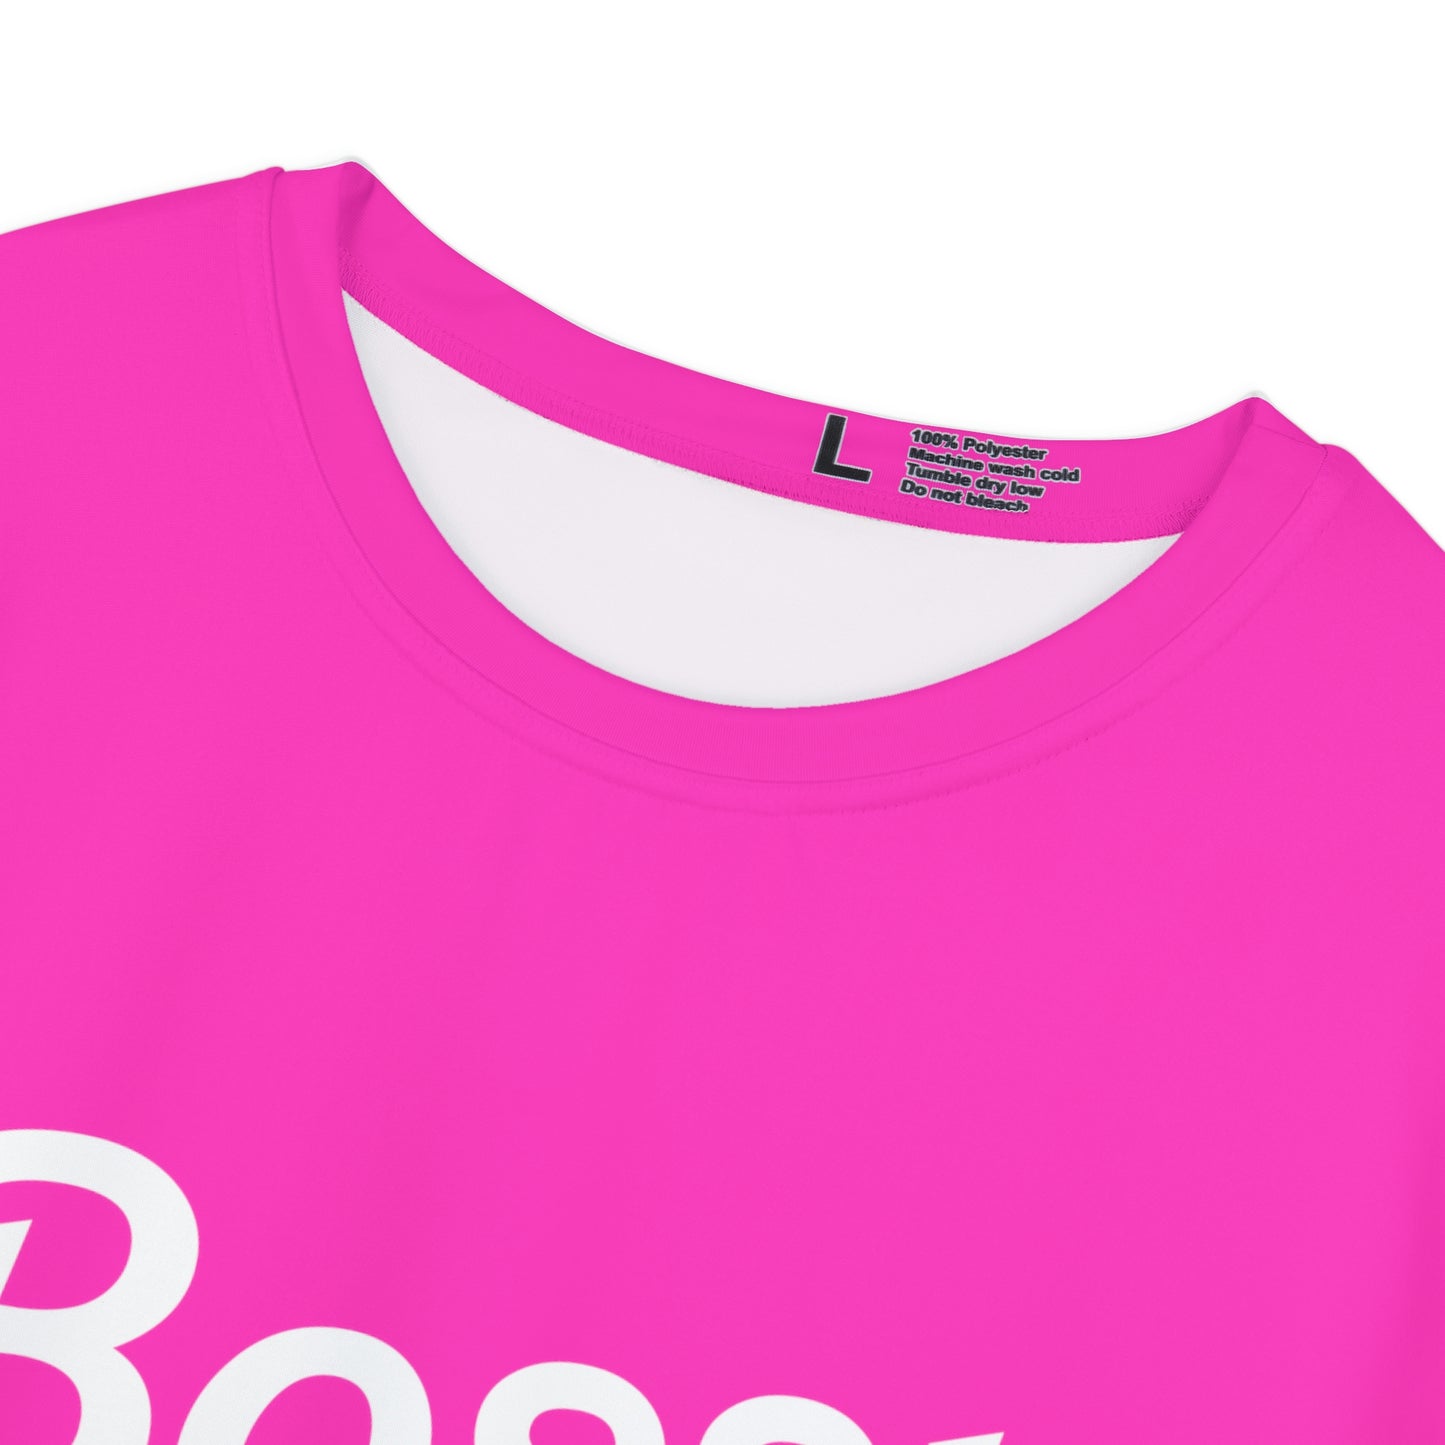 Bossy Barbie, Bachelorette Party Shirts, Bridesmaid Gifts, Here comes the Party Tees, Group Party Favor Shirts, Bridal Party Shirt for women